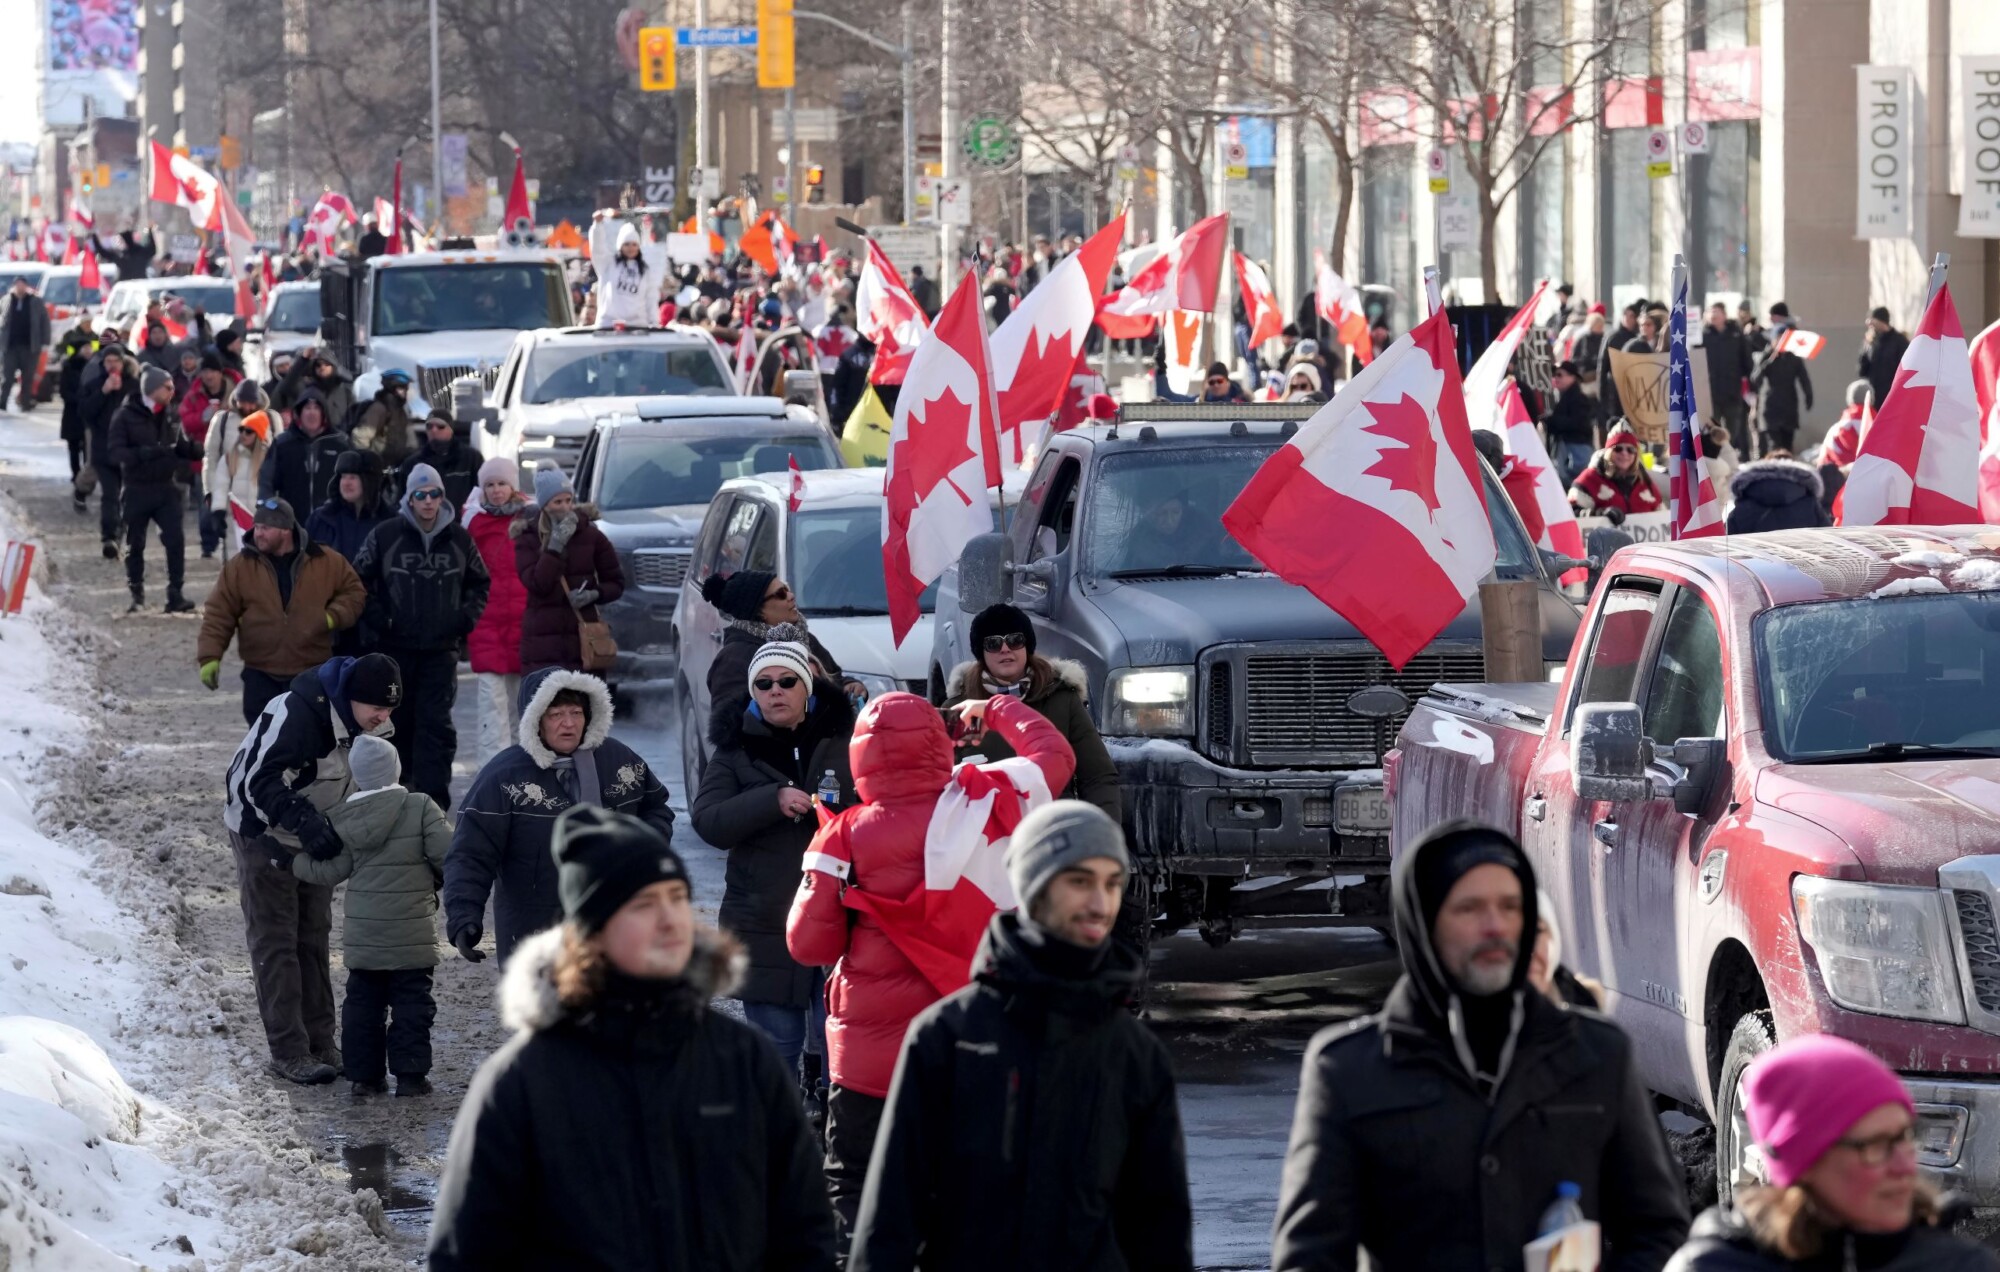 Ottawa Mayor Declares State of Emergency Due to Convoy Protest